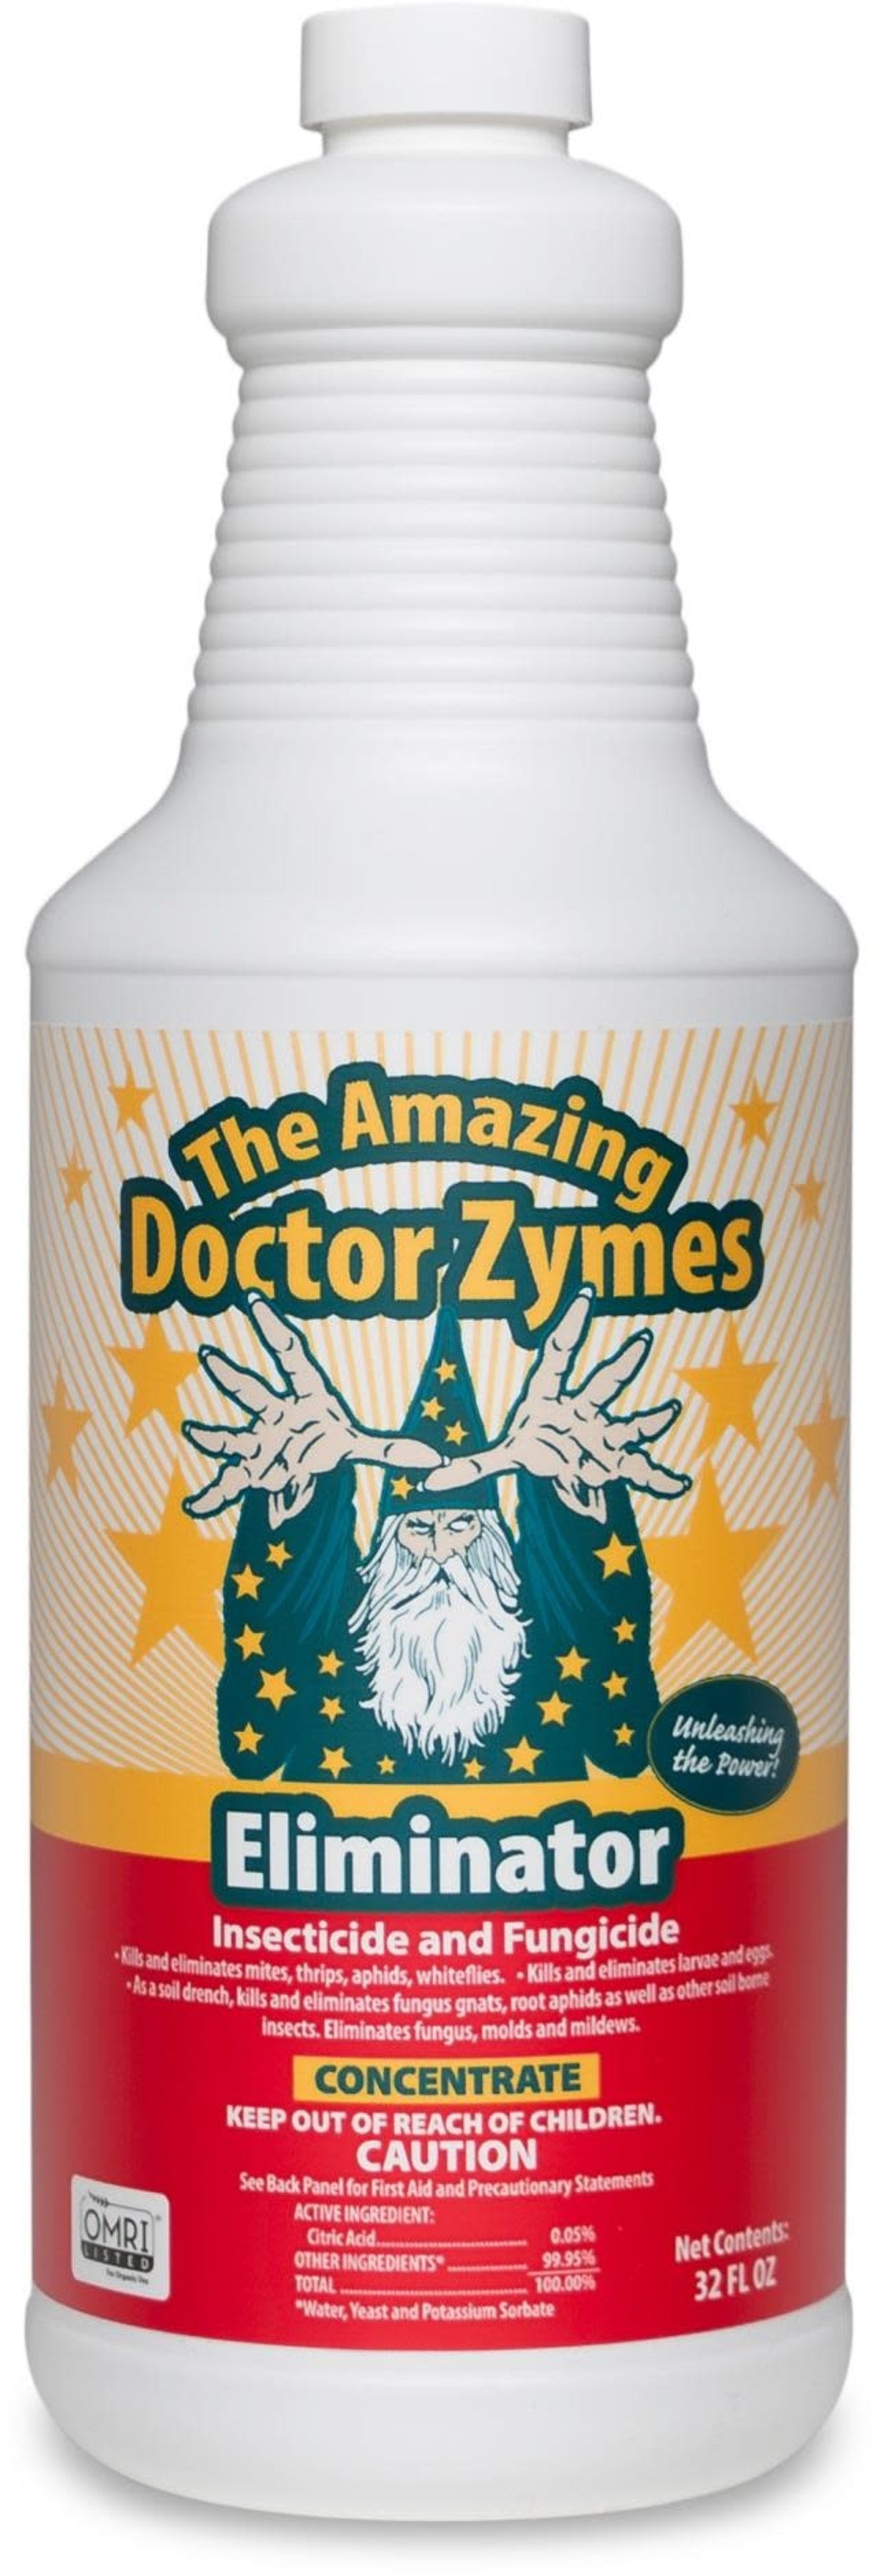 The Amazing Dr. Zymes Eliminator Concentrate